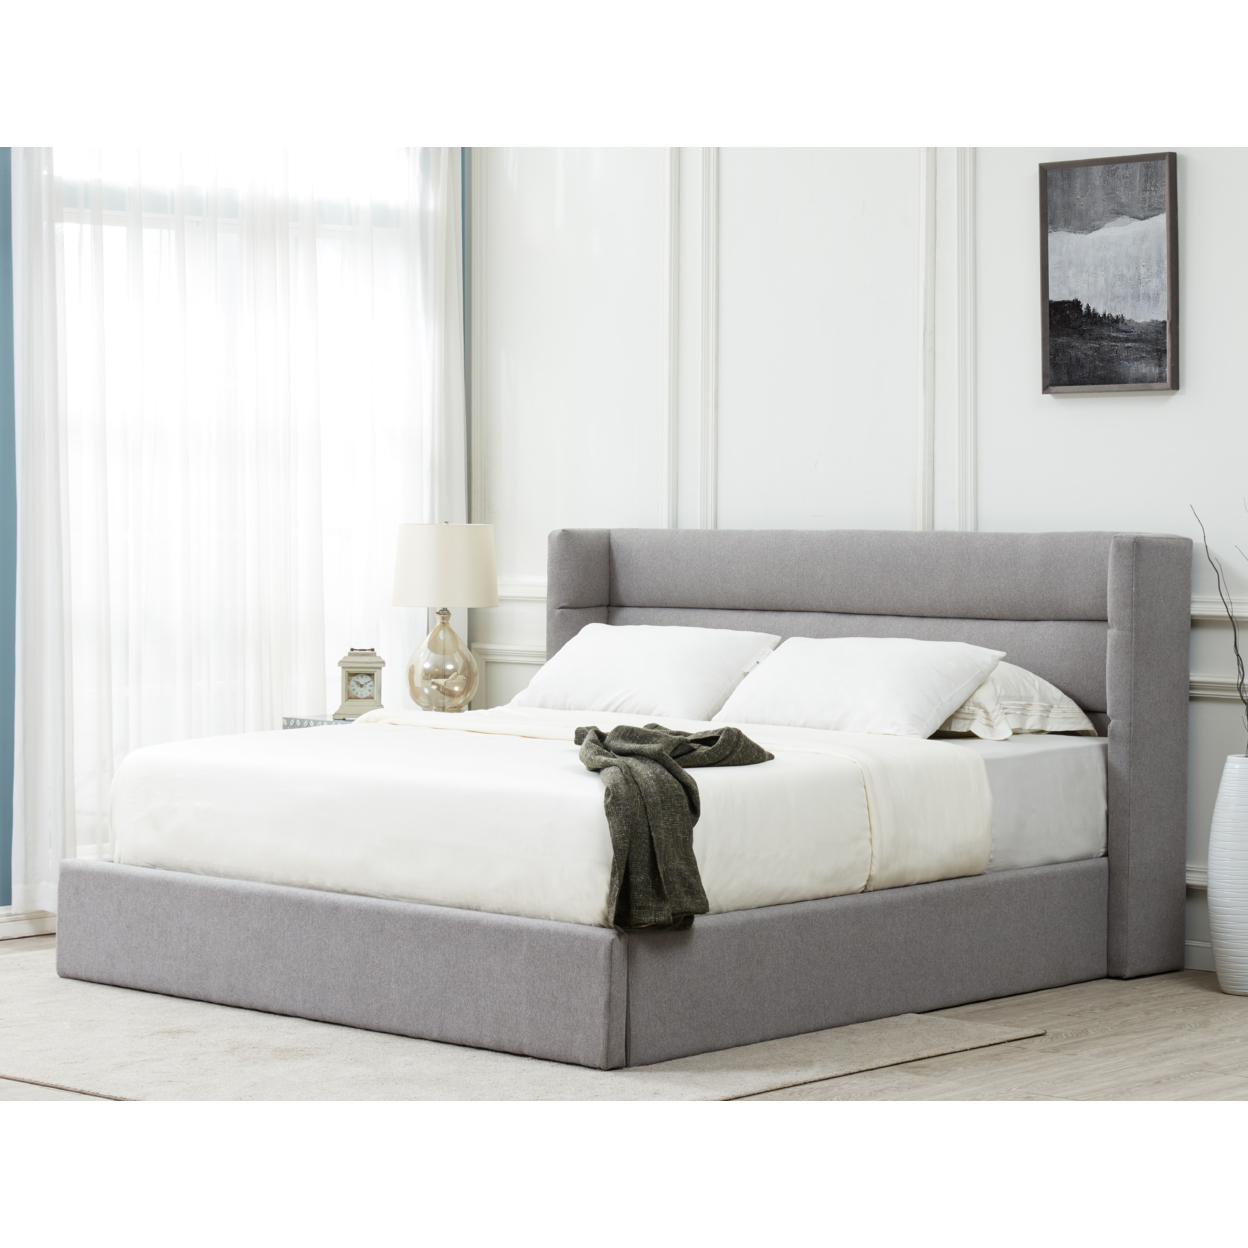 SAFAVIEH COUTURE OLIVIANNA LOW PROFILE BED Light Grey